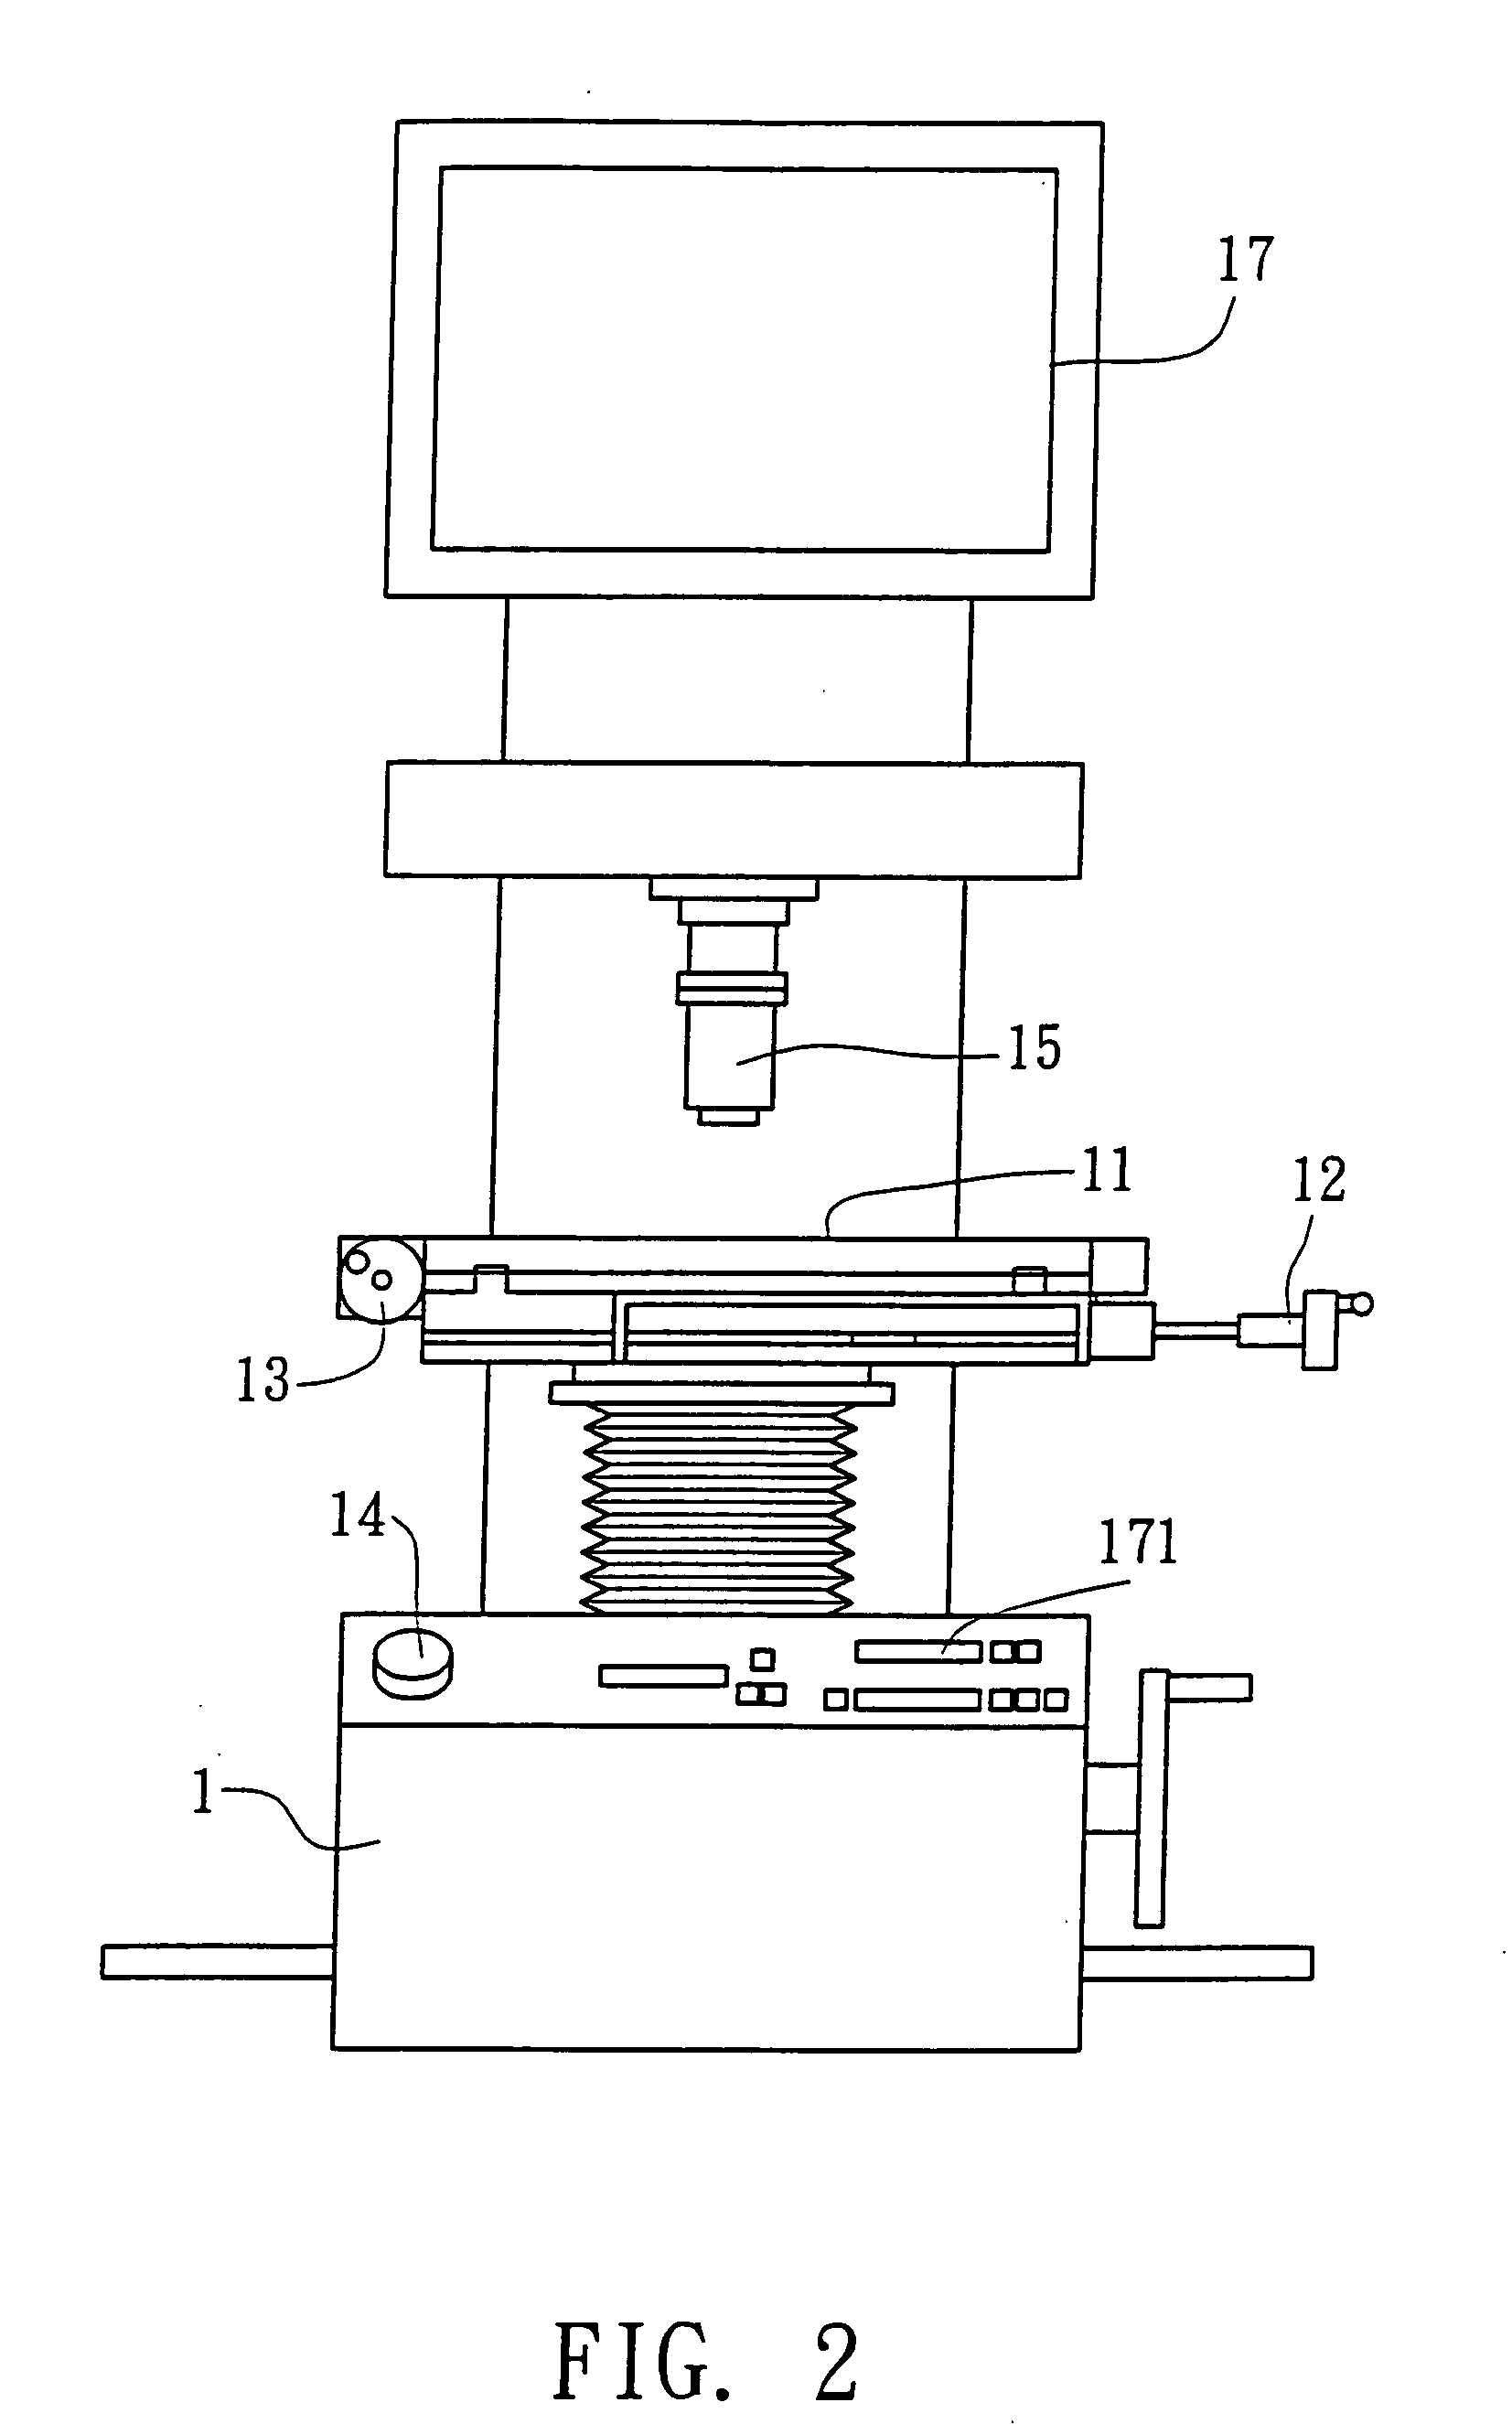 Length measure apparatus and the method for measuring